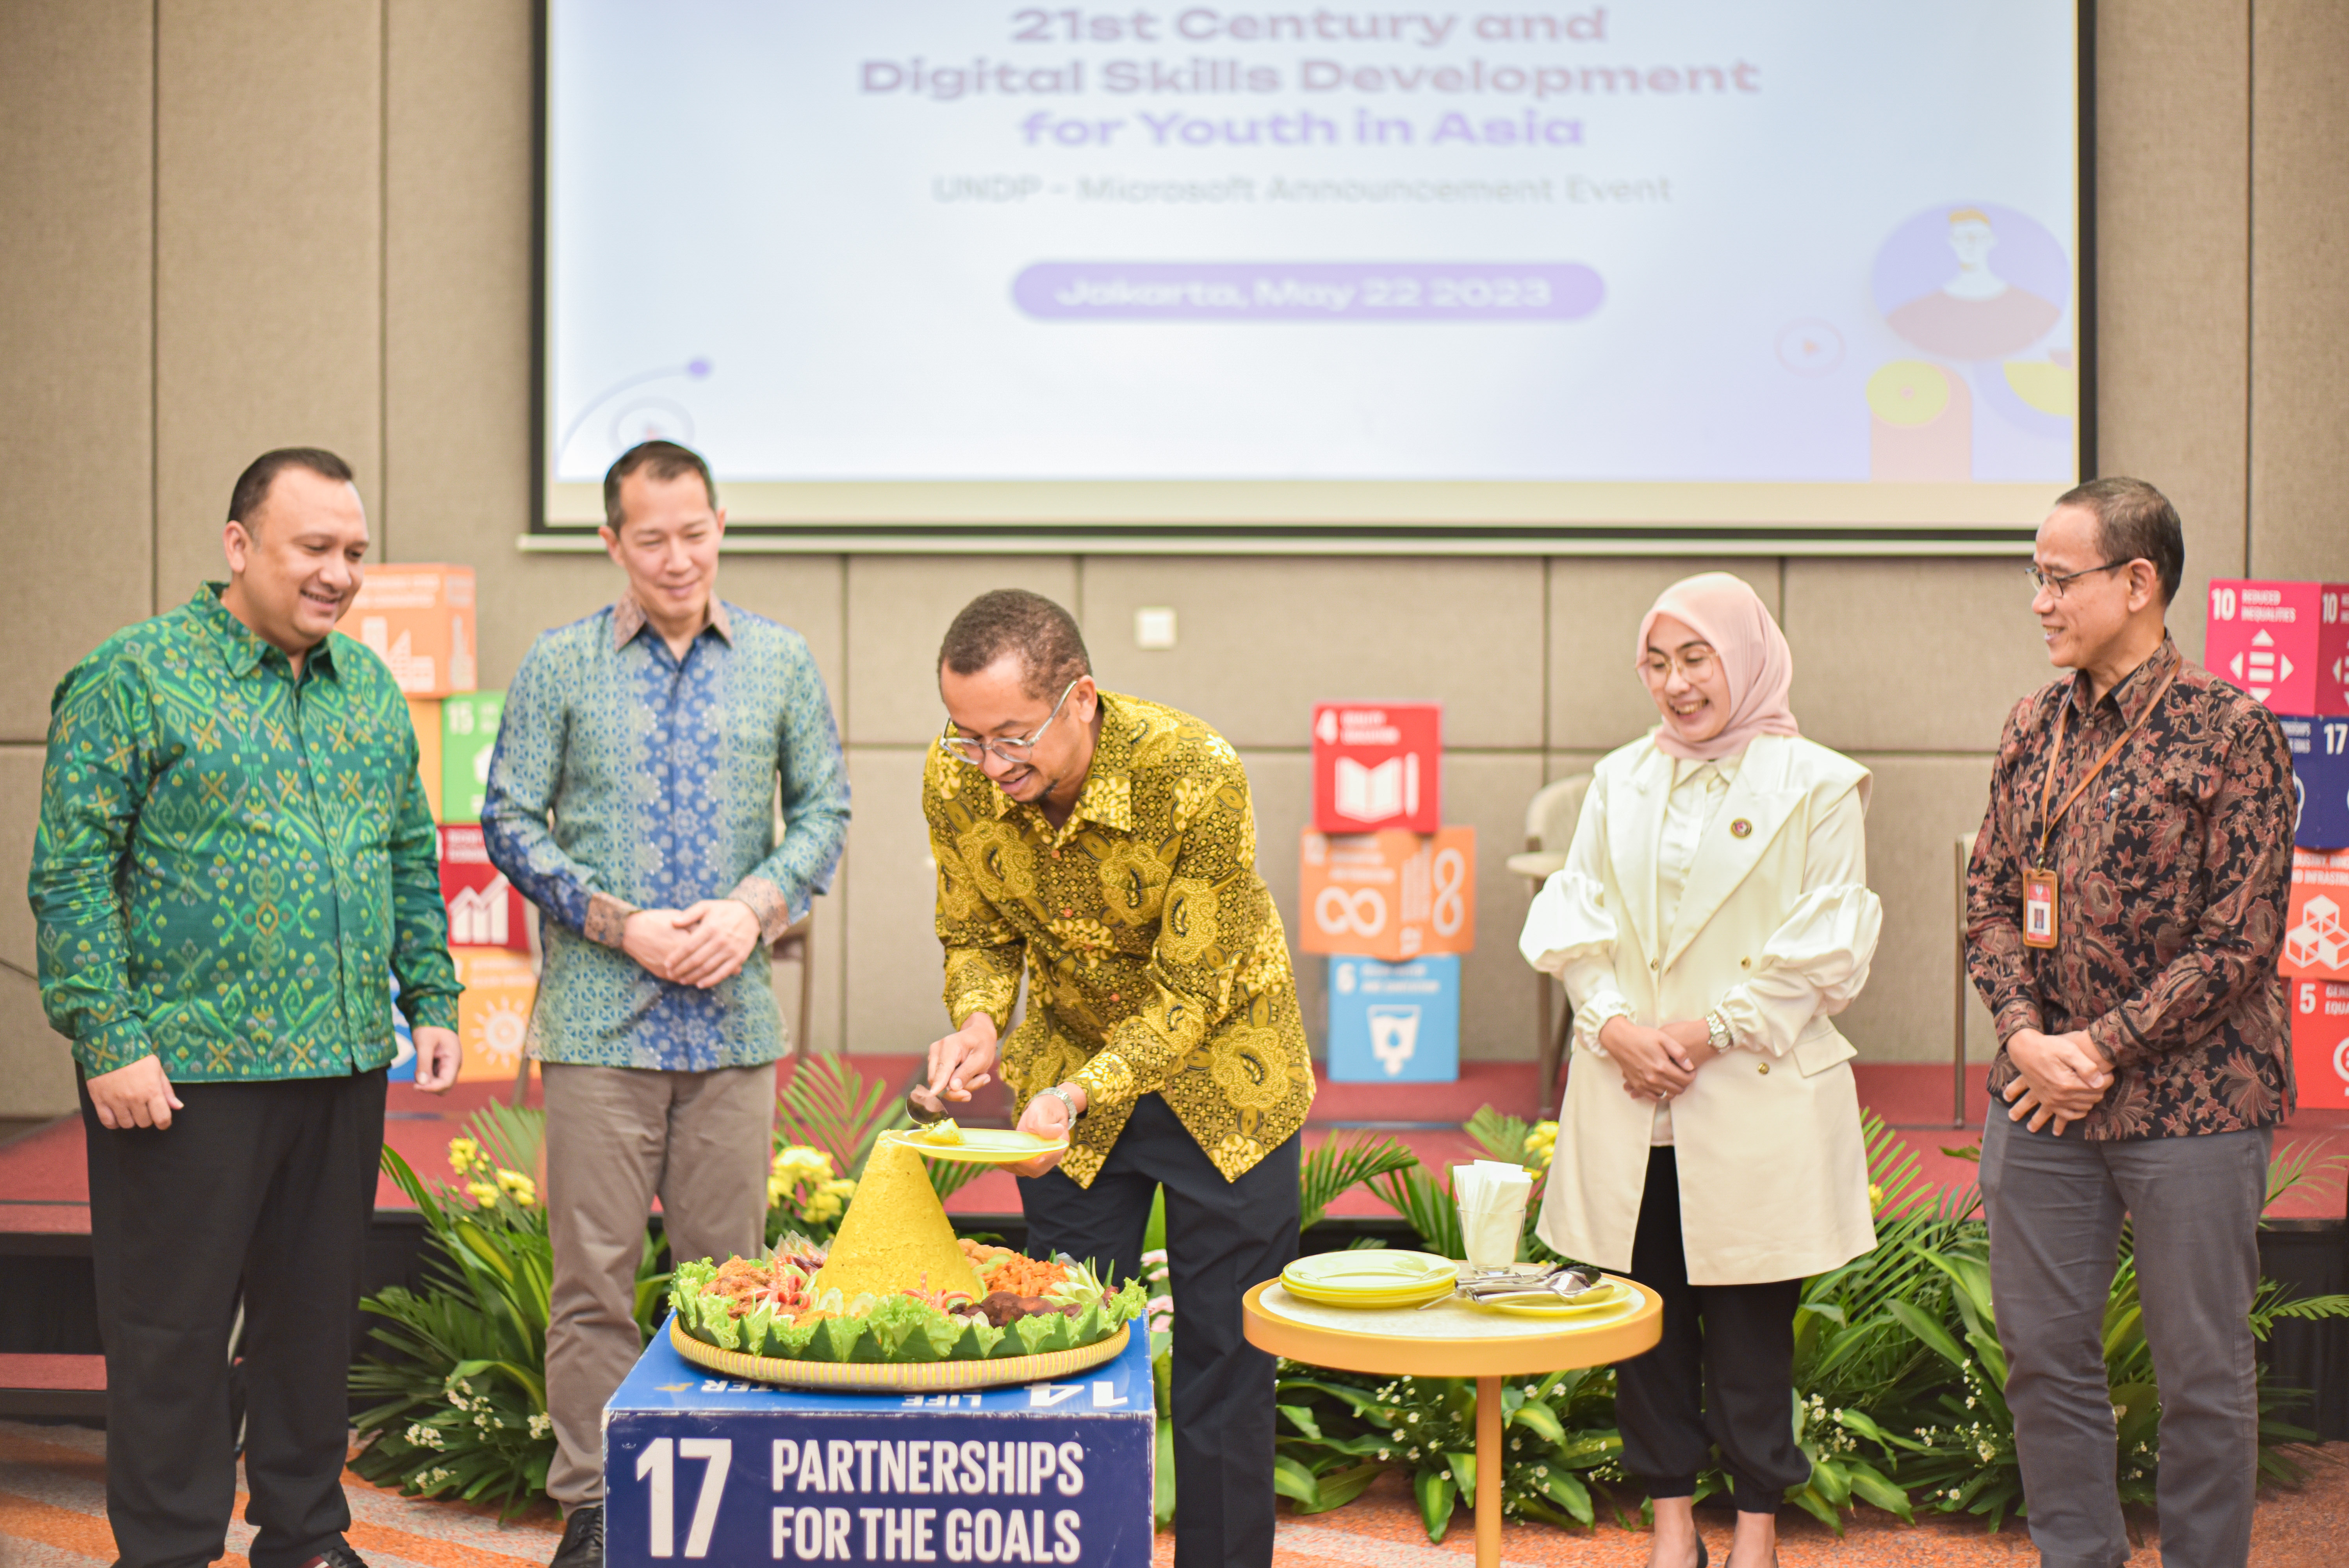 UNDP and Microsoft Joint Forces for Youth in Asia